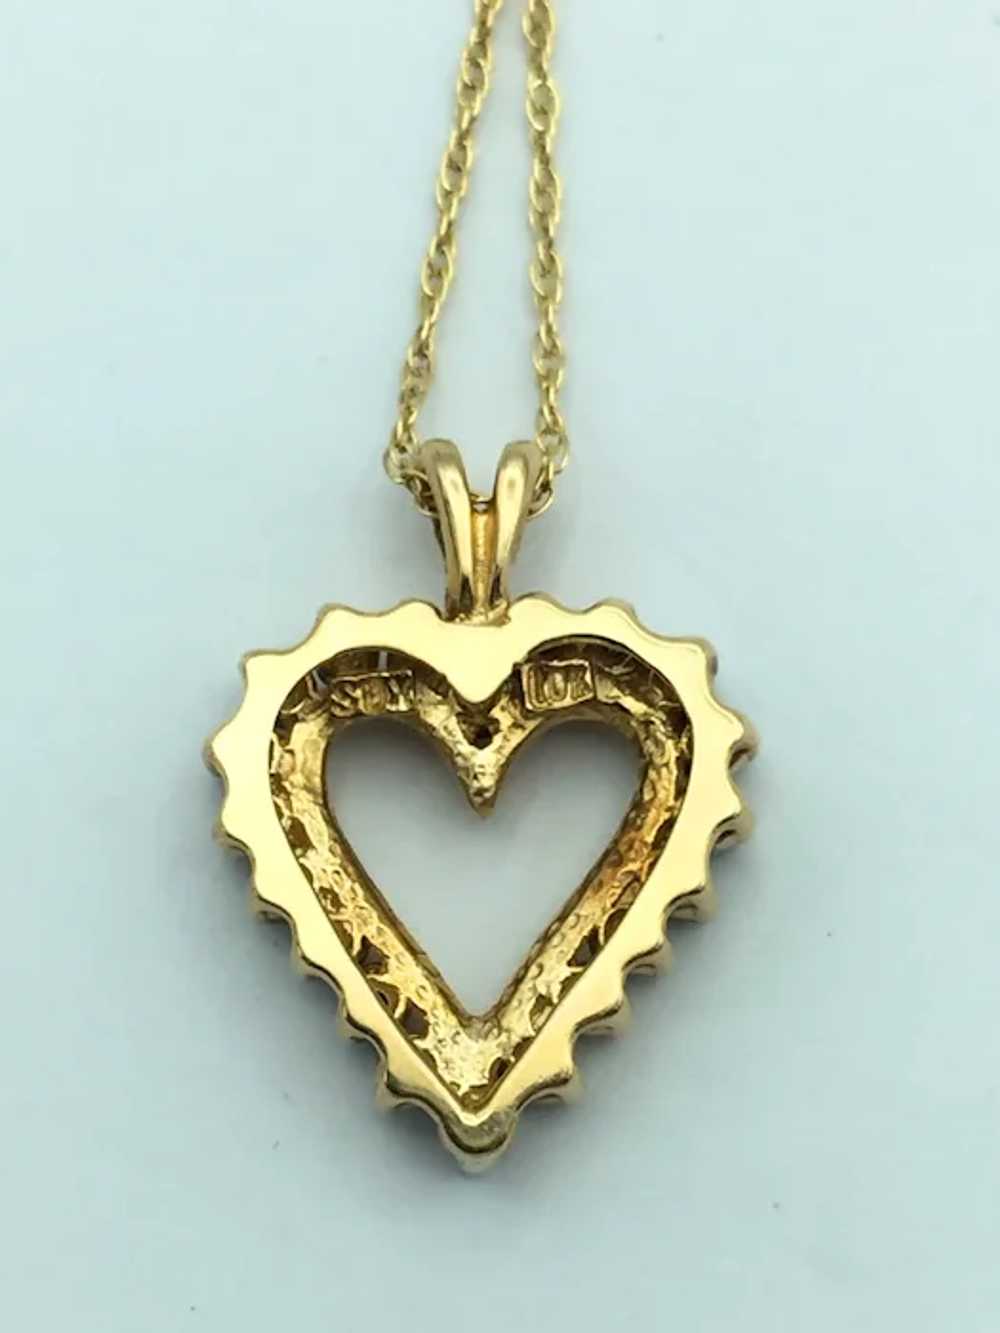 10KY 0.40ctw Diamond Heart Pendant with 18'' Chain - image 3